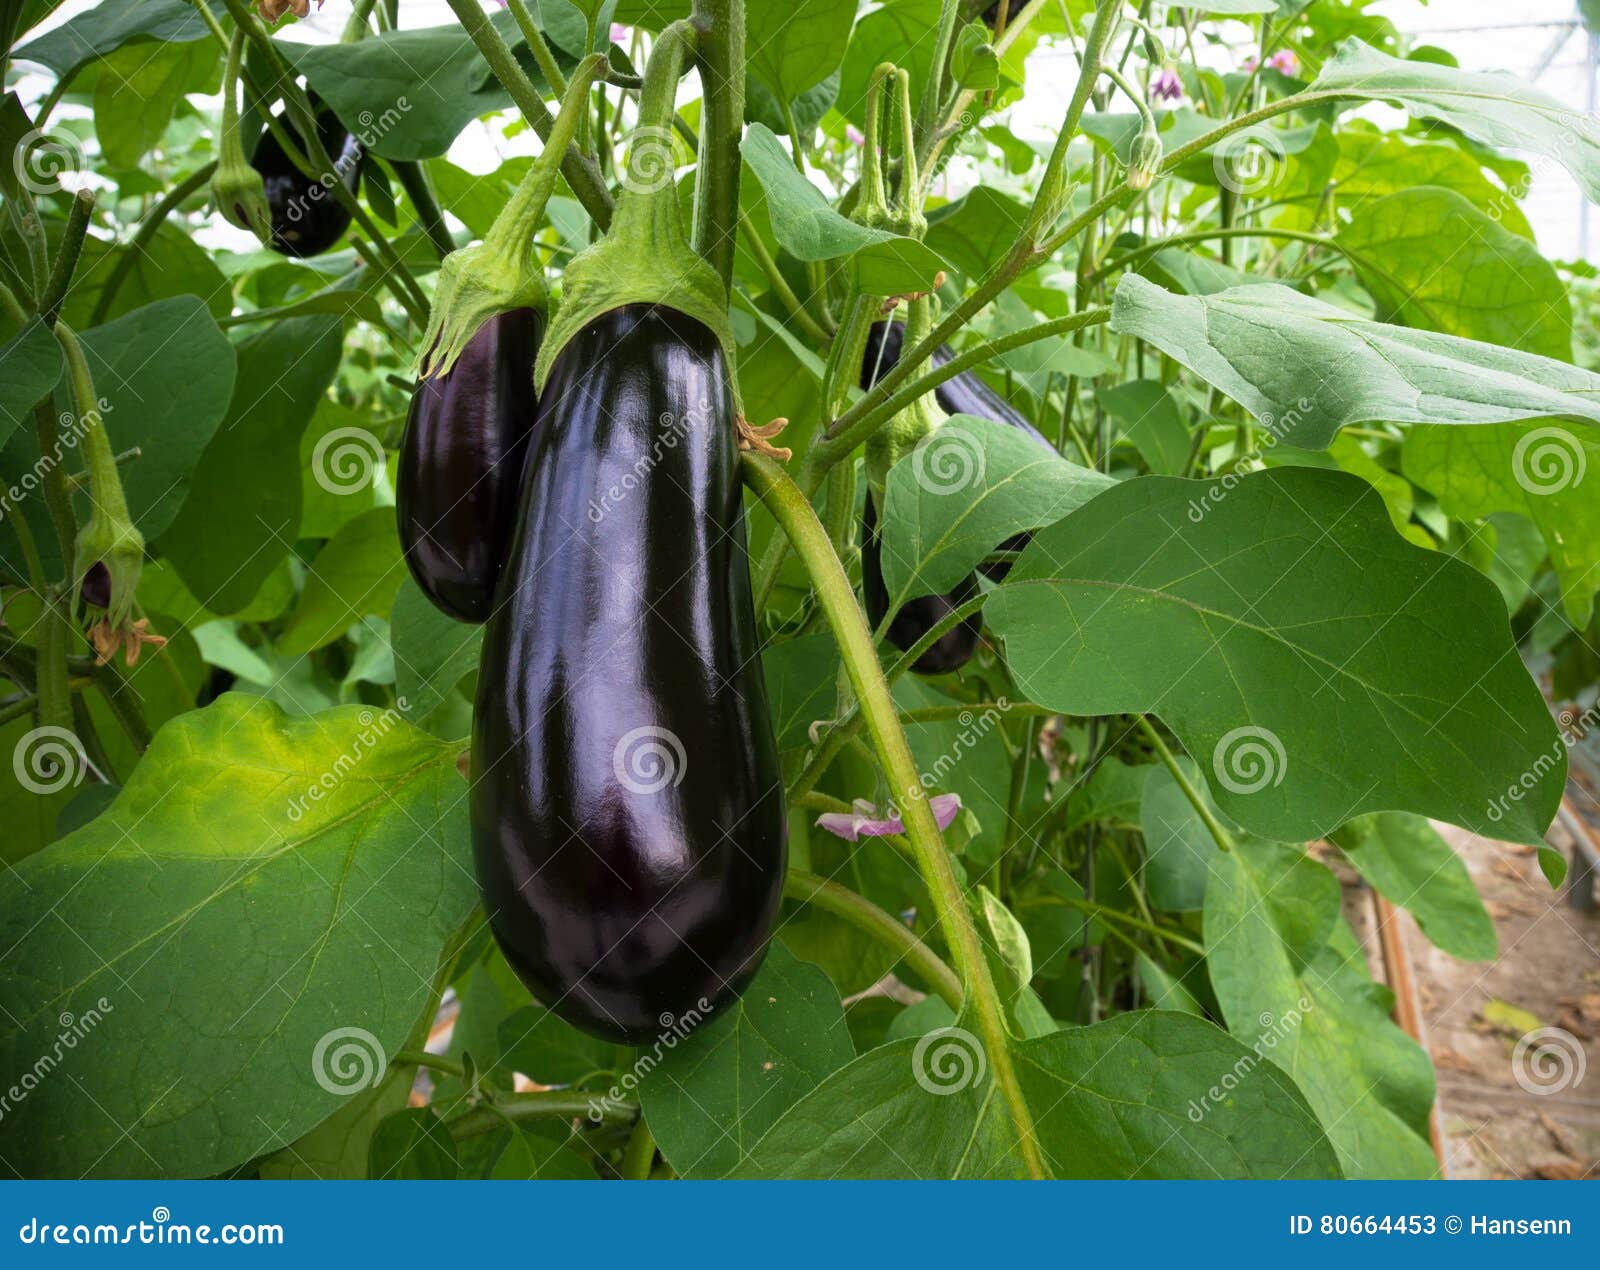 eggplant in a greenhouse